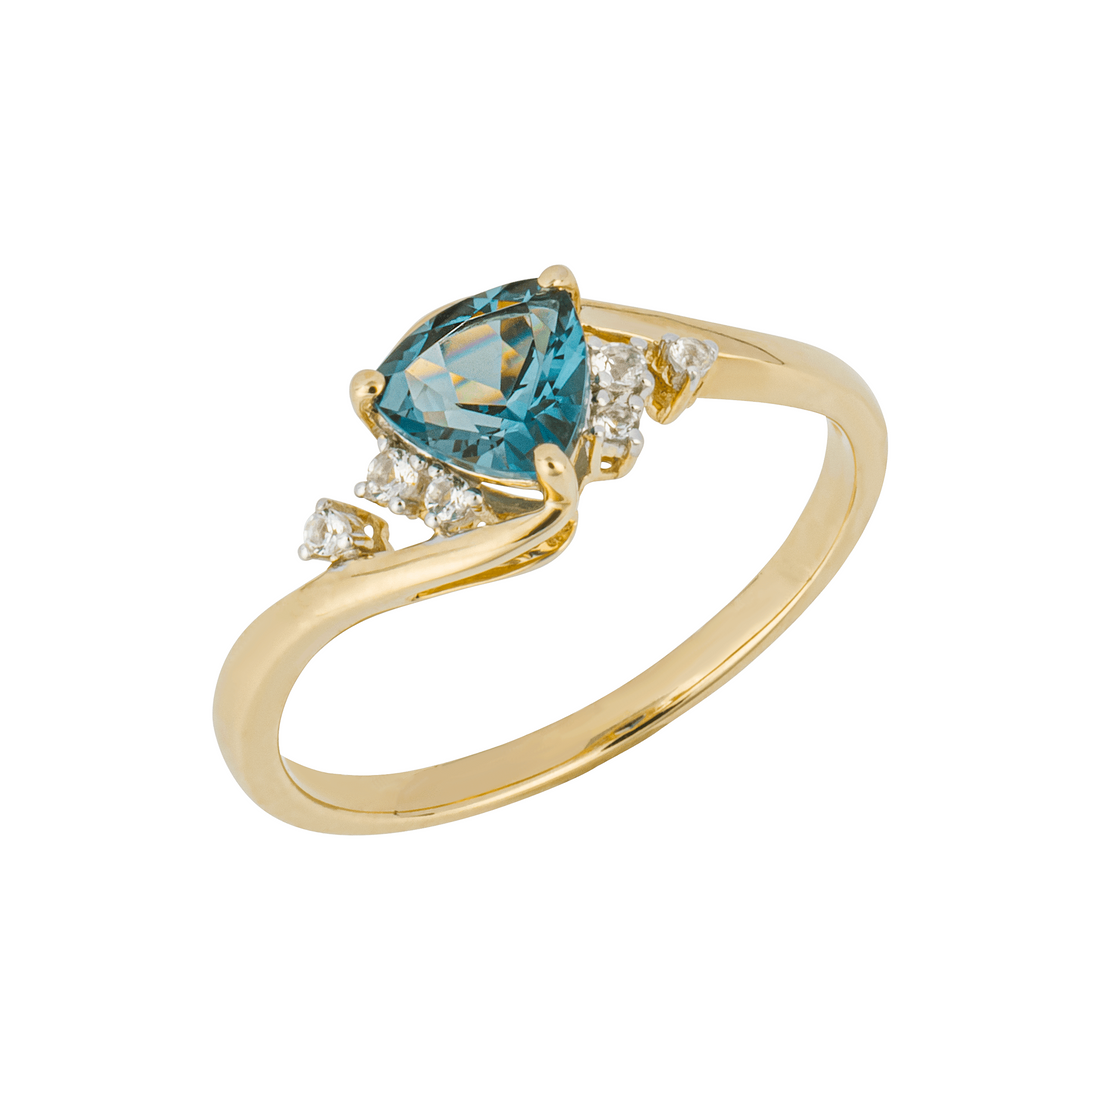 Trillion London Blue Topaz Ring with White Topaz in 9ct Yellow Gold - Robert Anthony Jewellers, Edinburgh